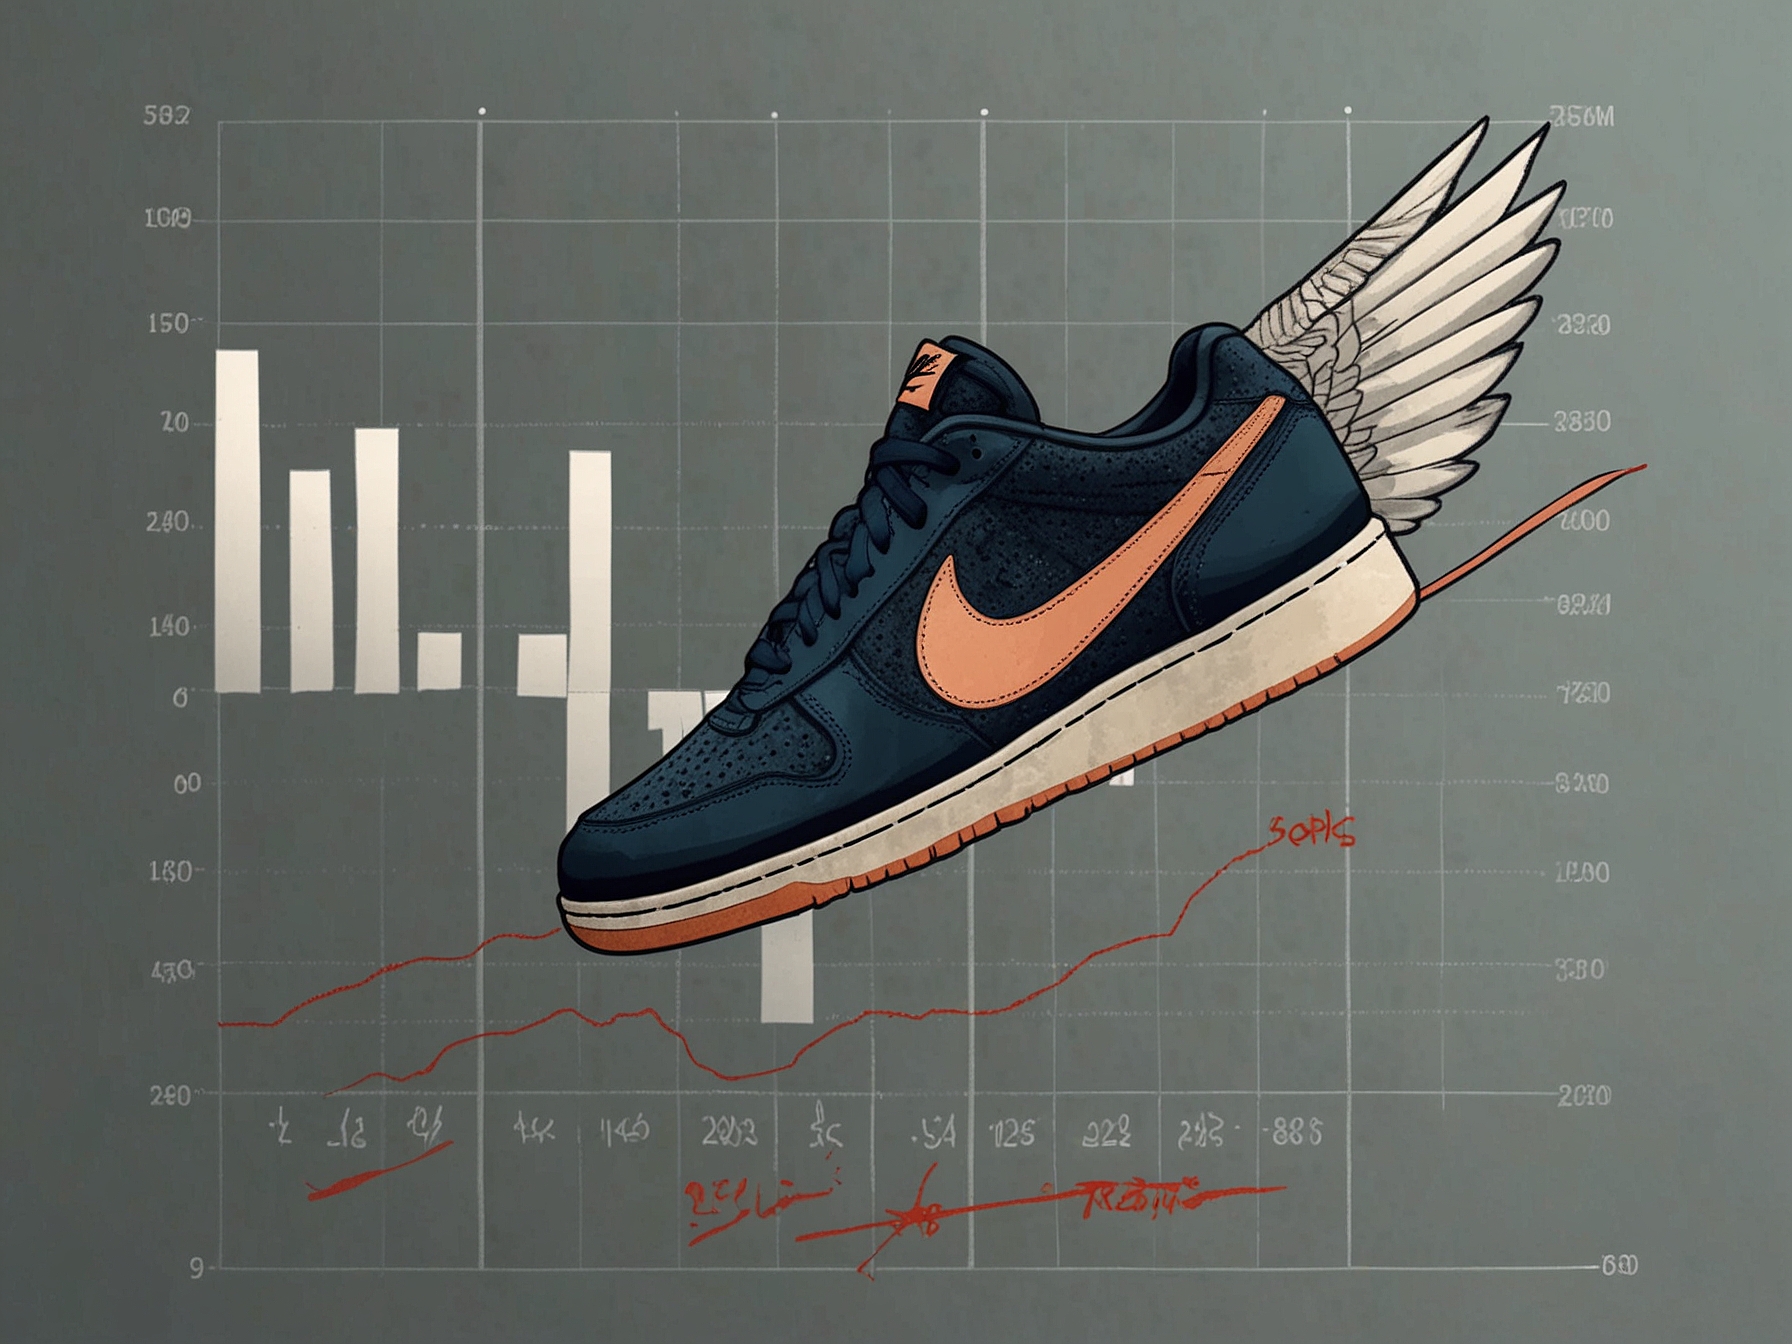 A digital sales chart with a Nike logo, highlighting the soaring online sales figures, indicative of Nike's successful direct-to-consumer strategy, which will be a focal point in the FQ4 results.